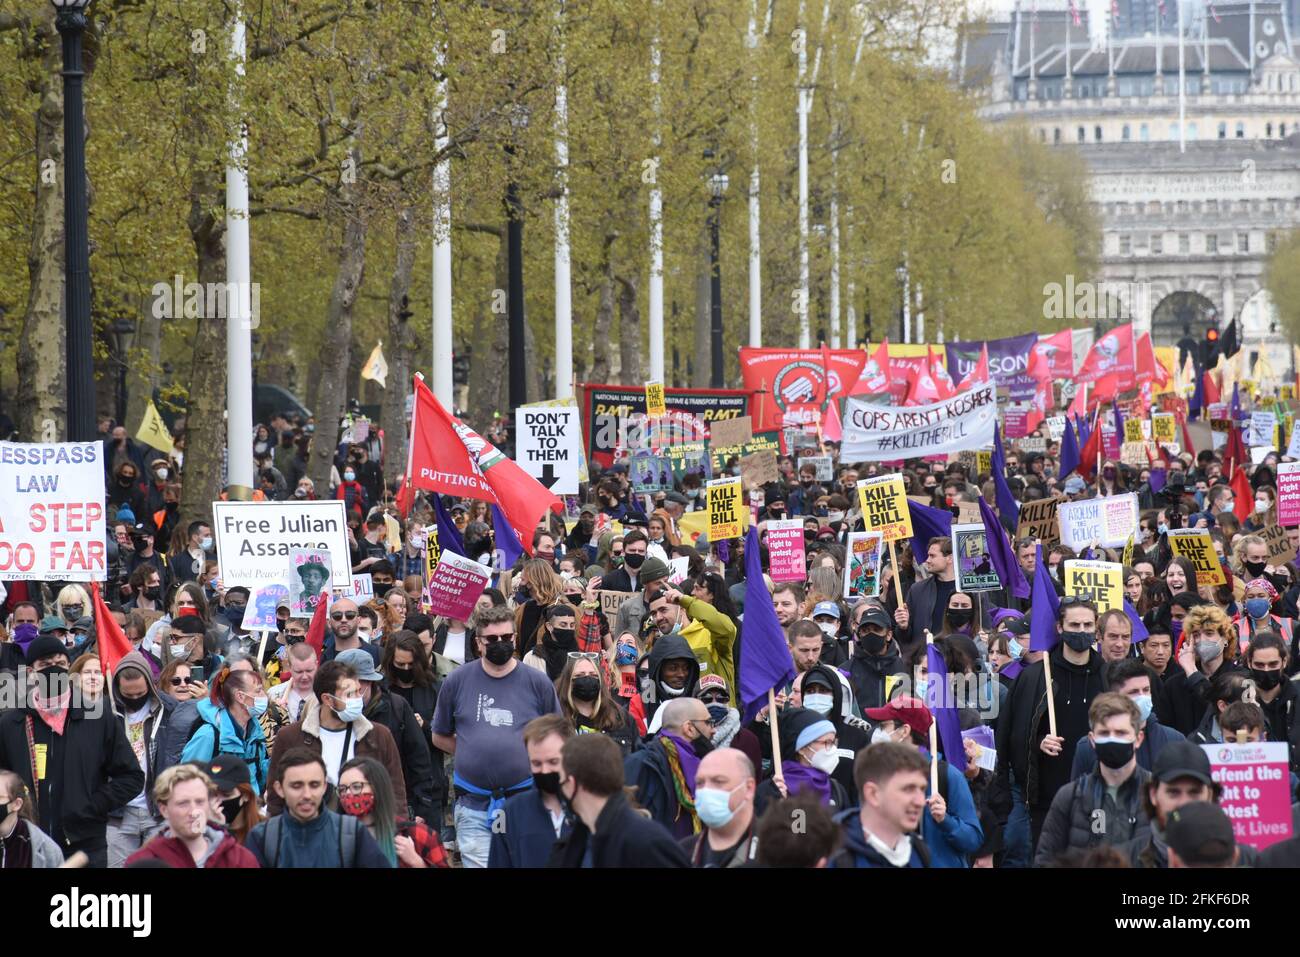 London, UK. 1 May 2021. Extinction Rebellion, Black Lives Matter, Antifa, Anarchists and many other groups gathered in London for 'Kill The Bill' protest against the government's proposed Police, Crime, Sentencing and Courts Bill. Credit: Andrea Domeniconi/Alamy Live News Stock Photo